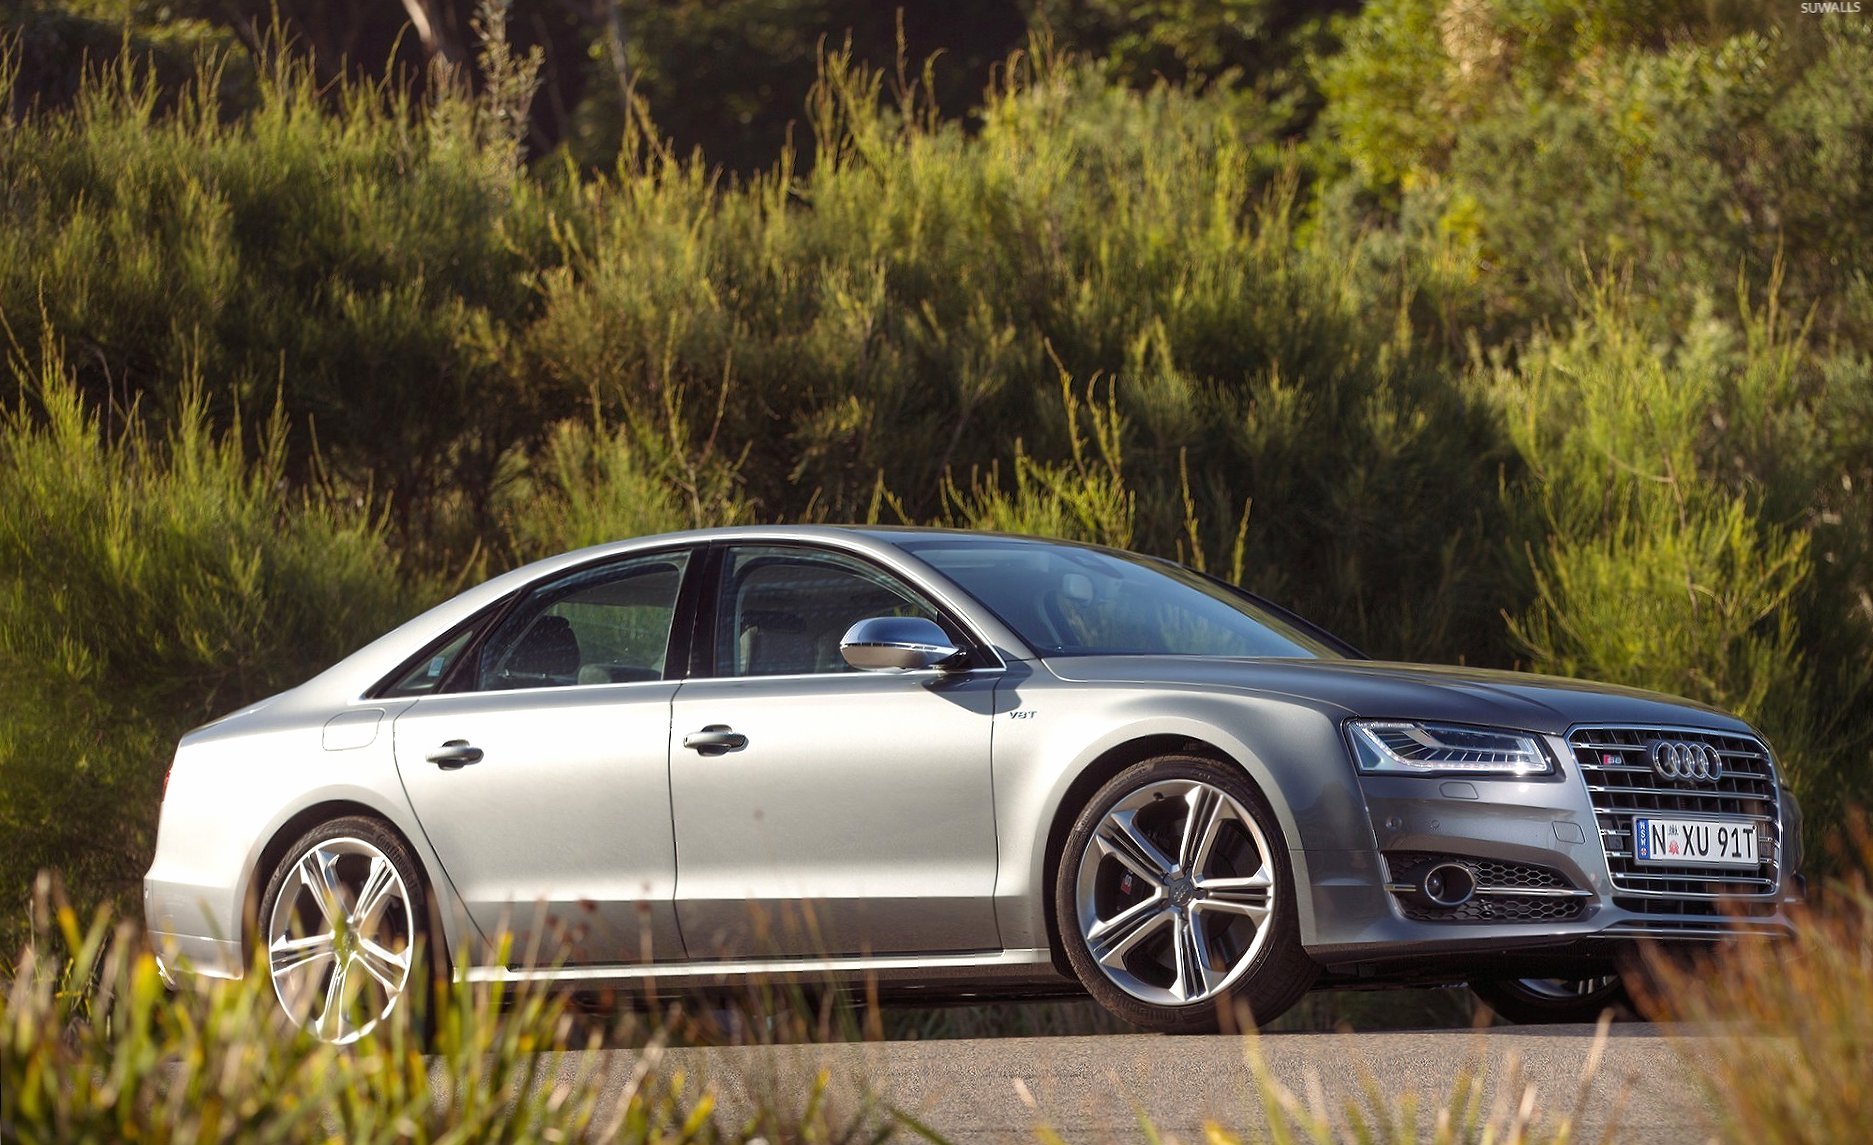 2014 Audi S8 near the forest wallpapers HD quality